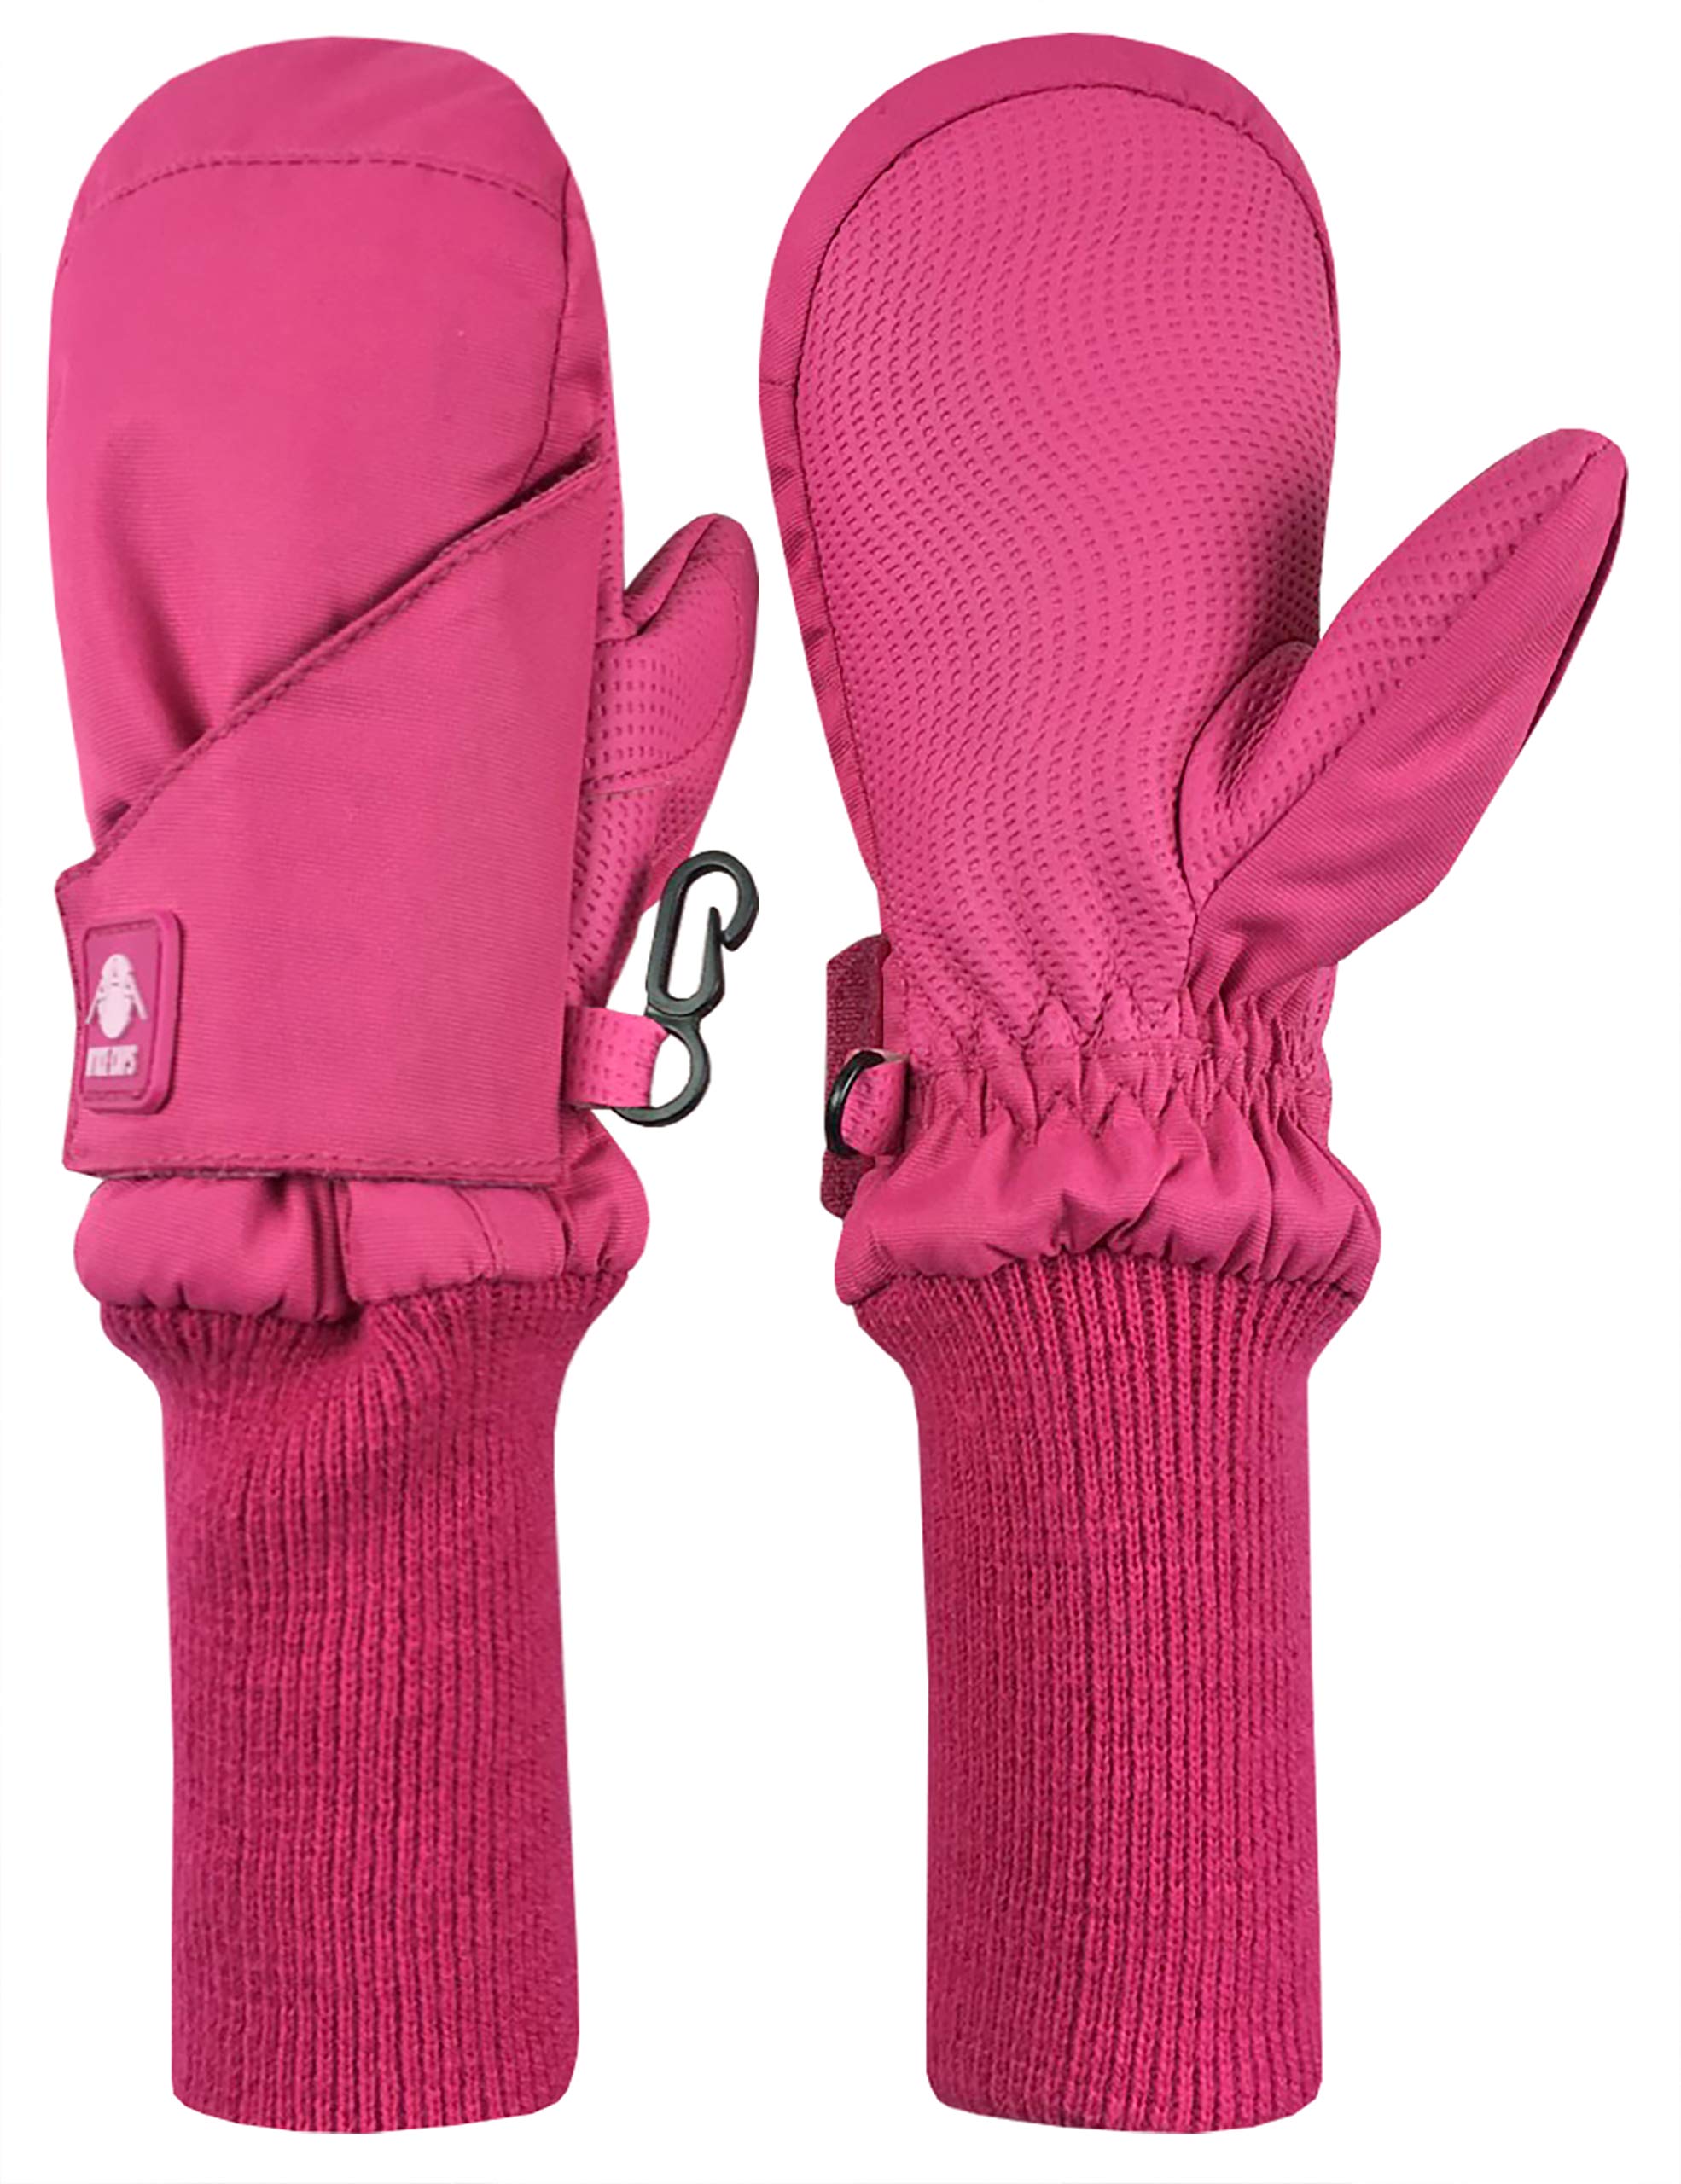 N'ice Caps NIce caps Kids Waterproof Snow Mittens - Thinsulate Boys girls cold Weather (Fuchsia Extended cuffs, 1-2 Years)